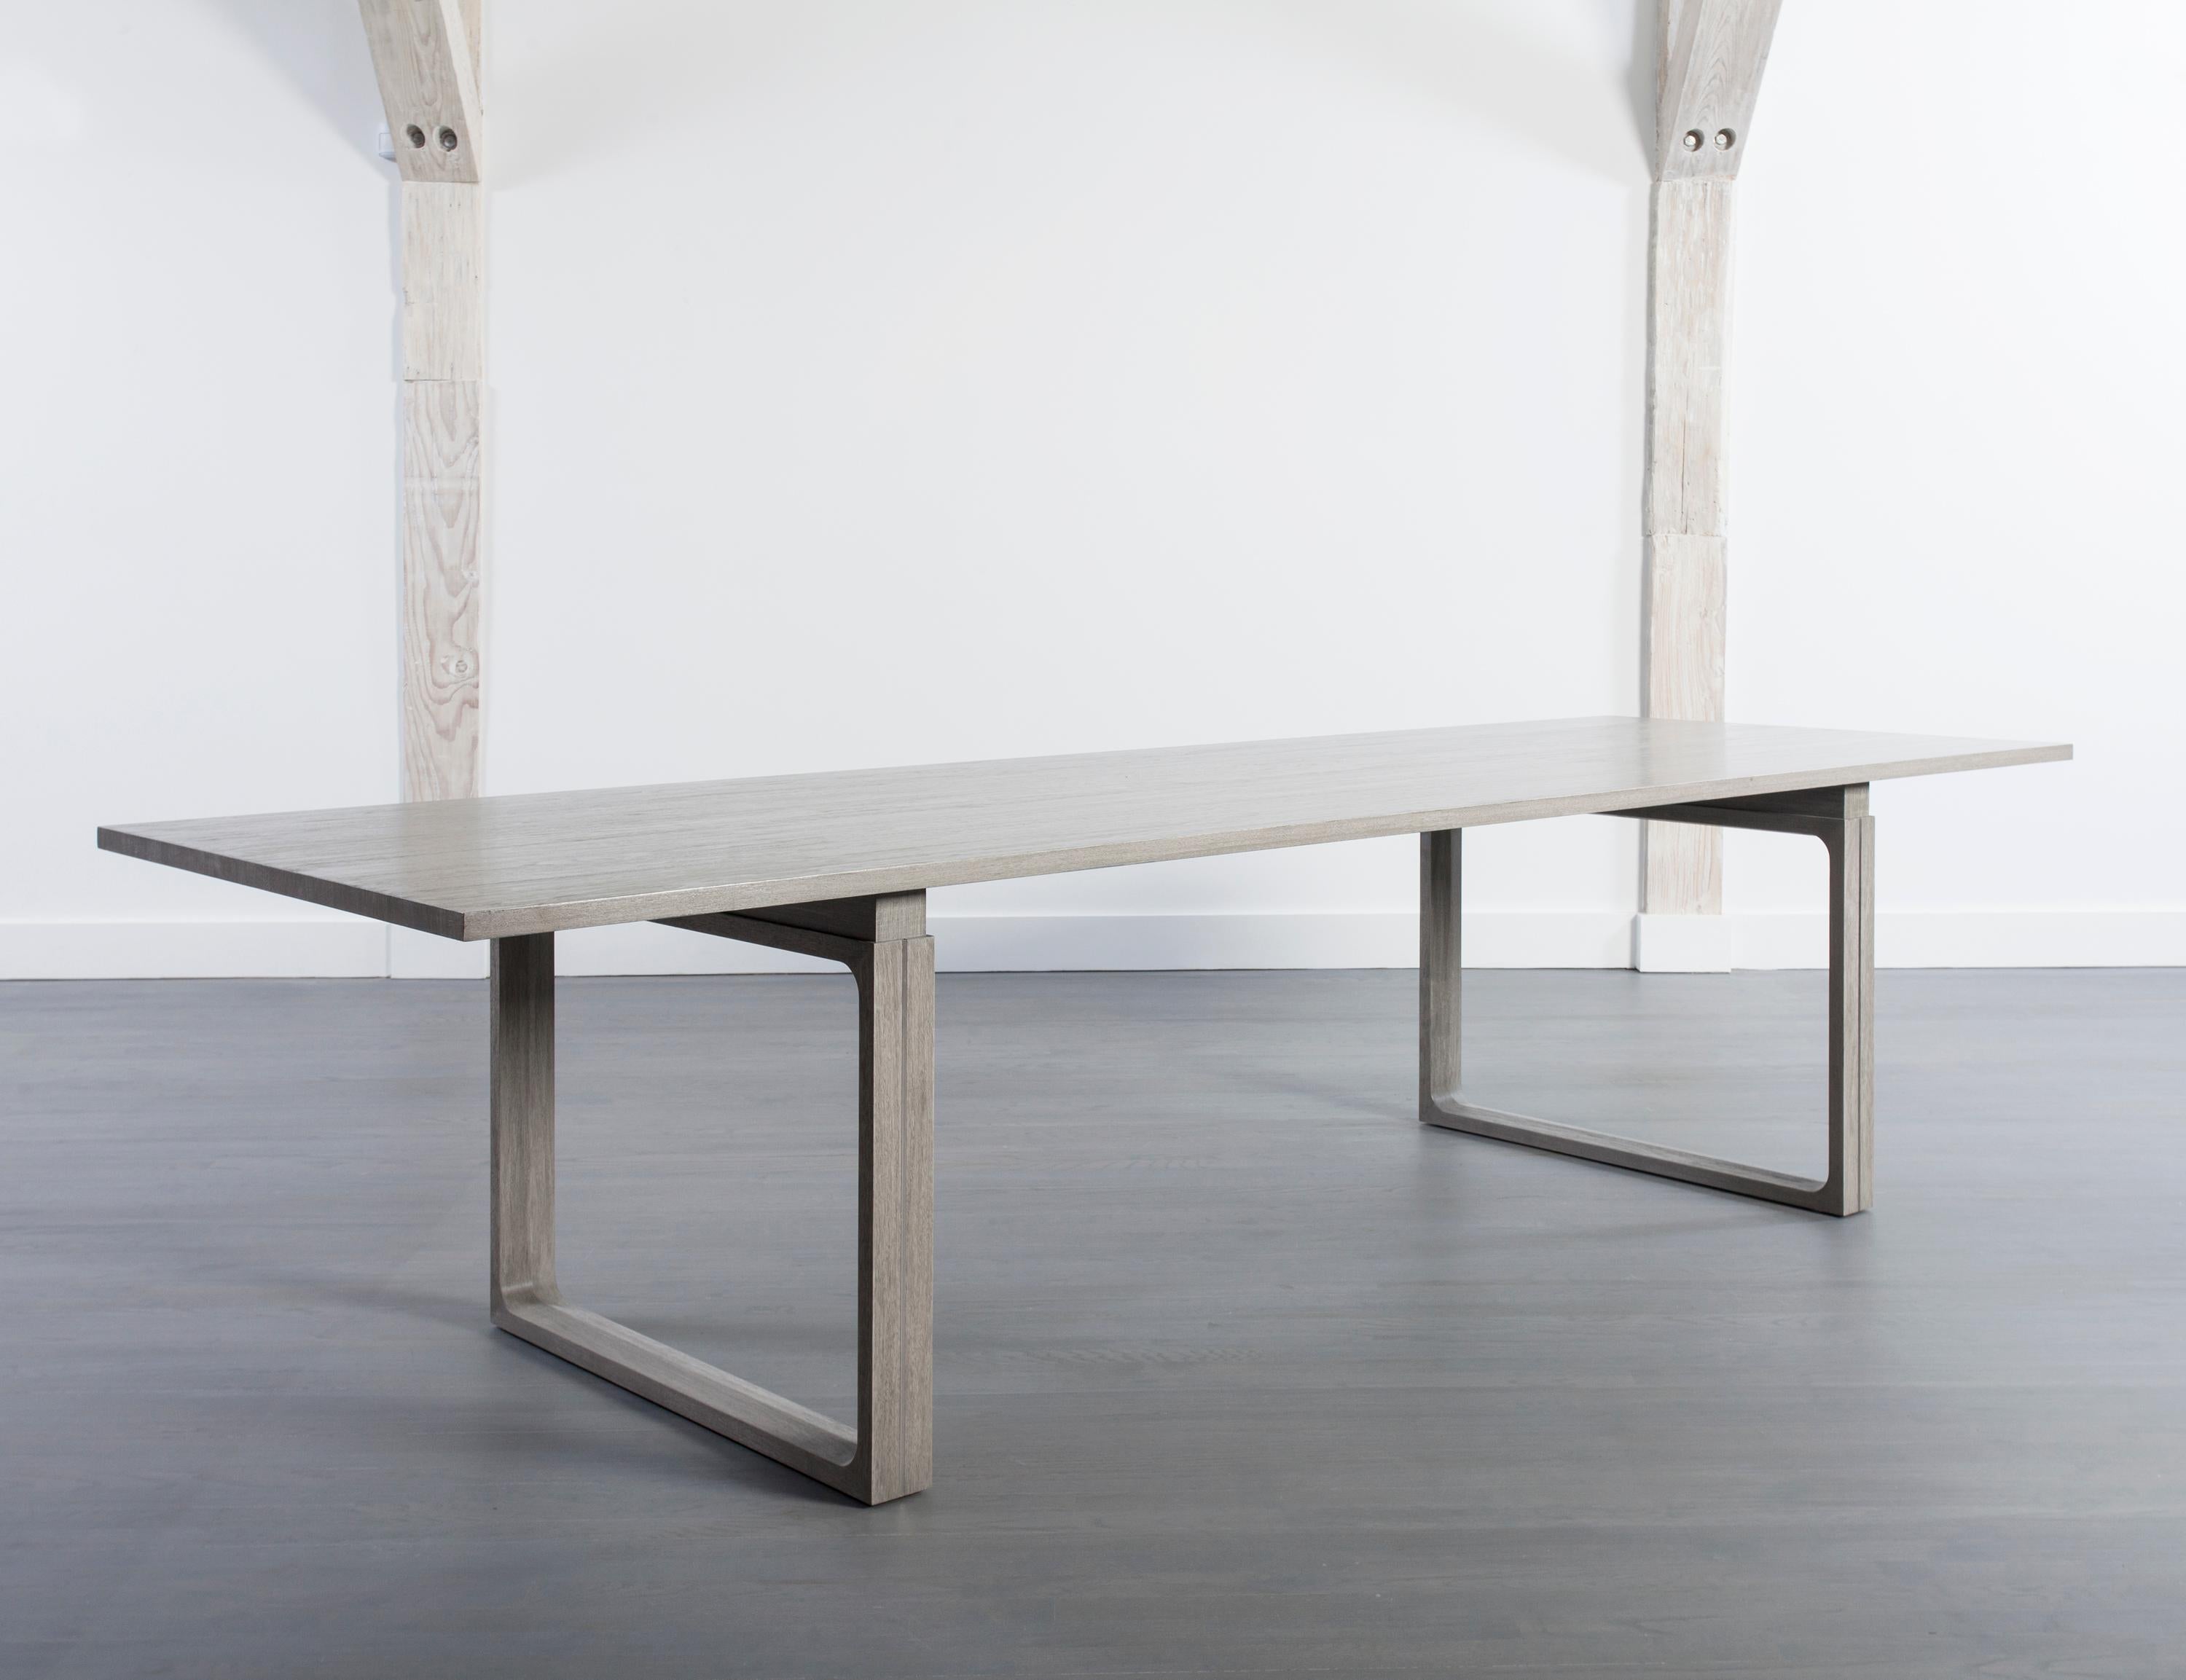 The clean lines of this elegant modern walnut dining table enables its wood grain to take center stage. Stained in a dove grey, and resting on a pair of sculptural open square legs, this graceful table will provide for both casual and elegant